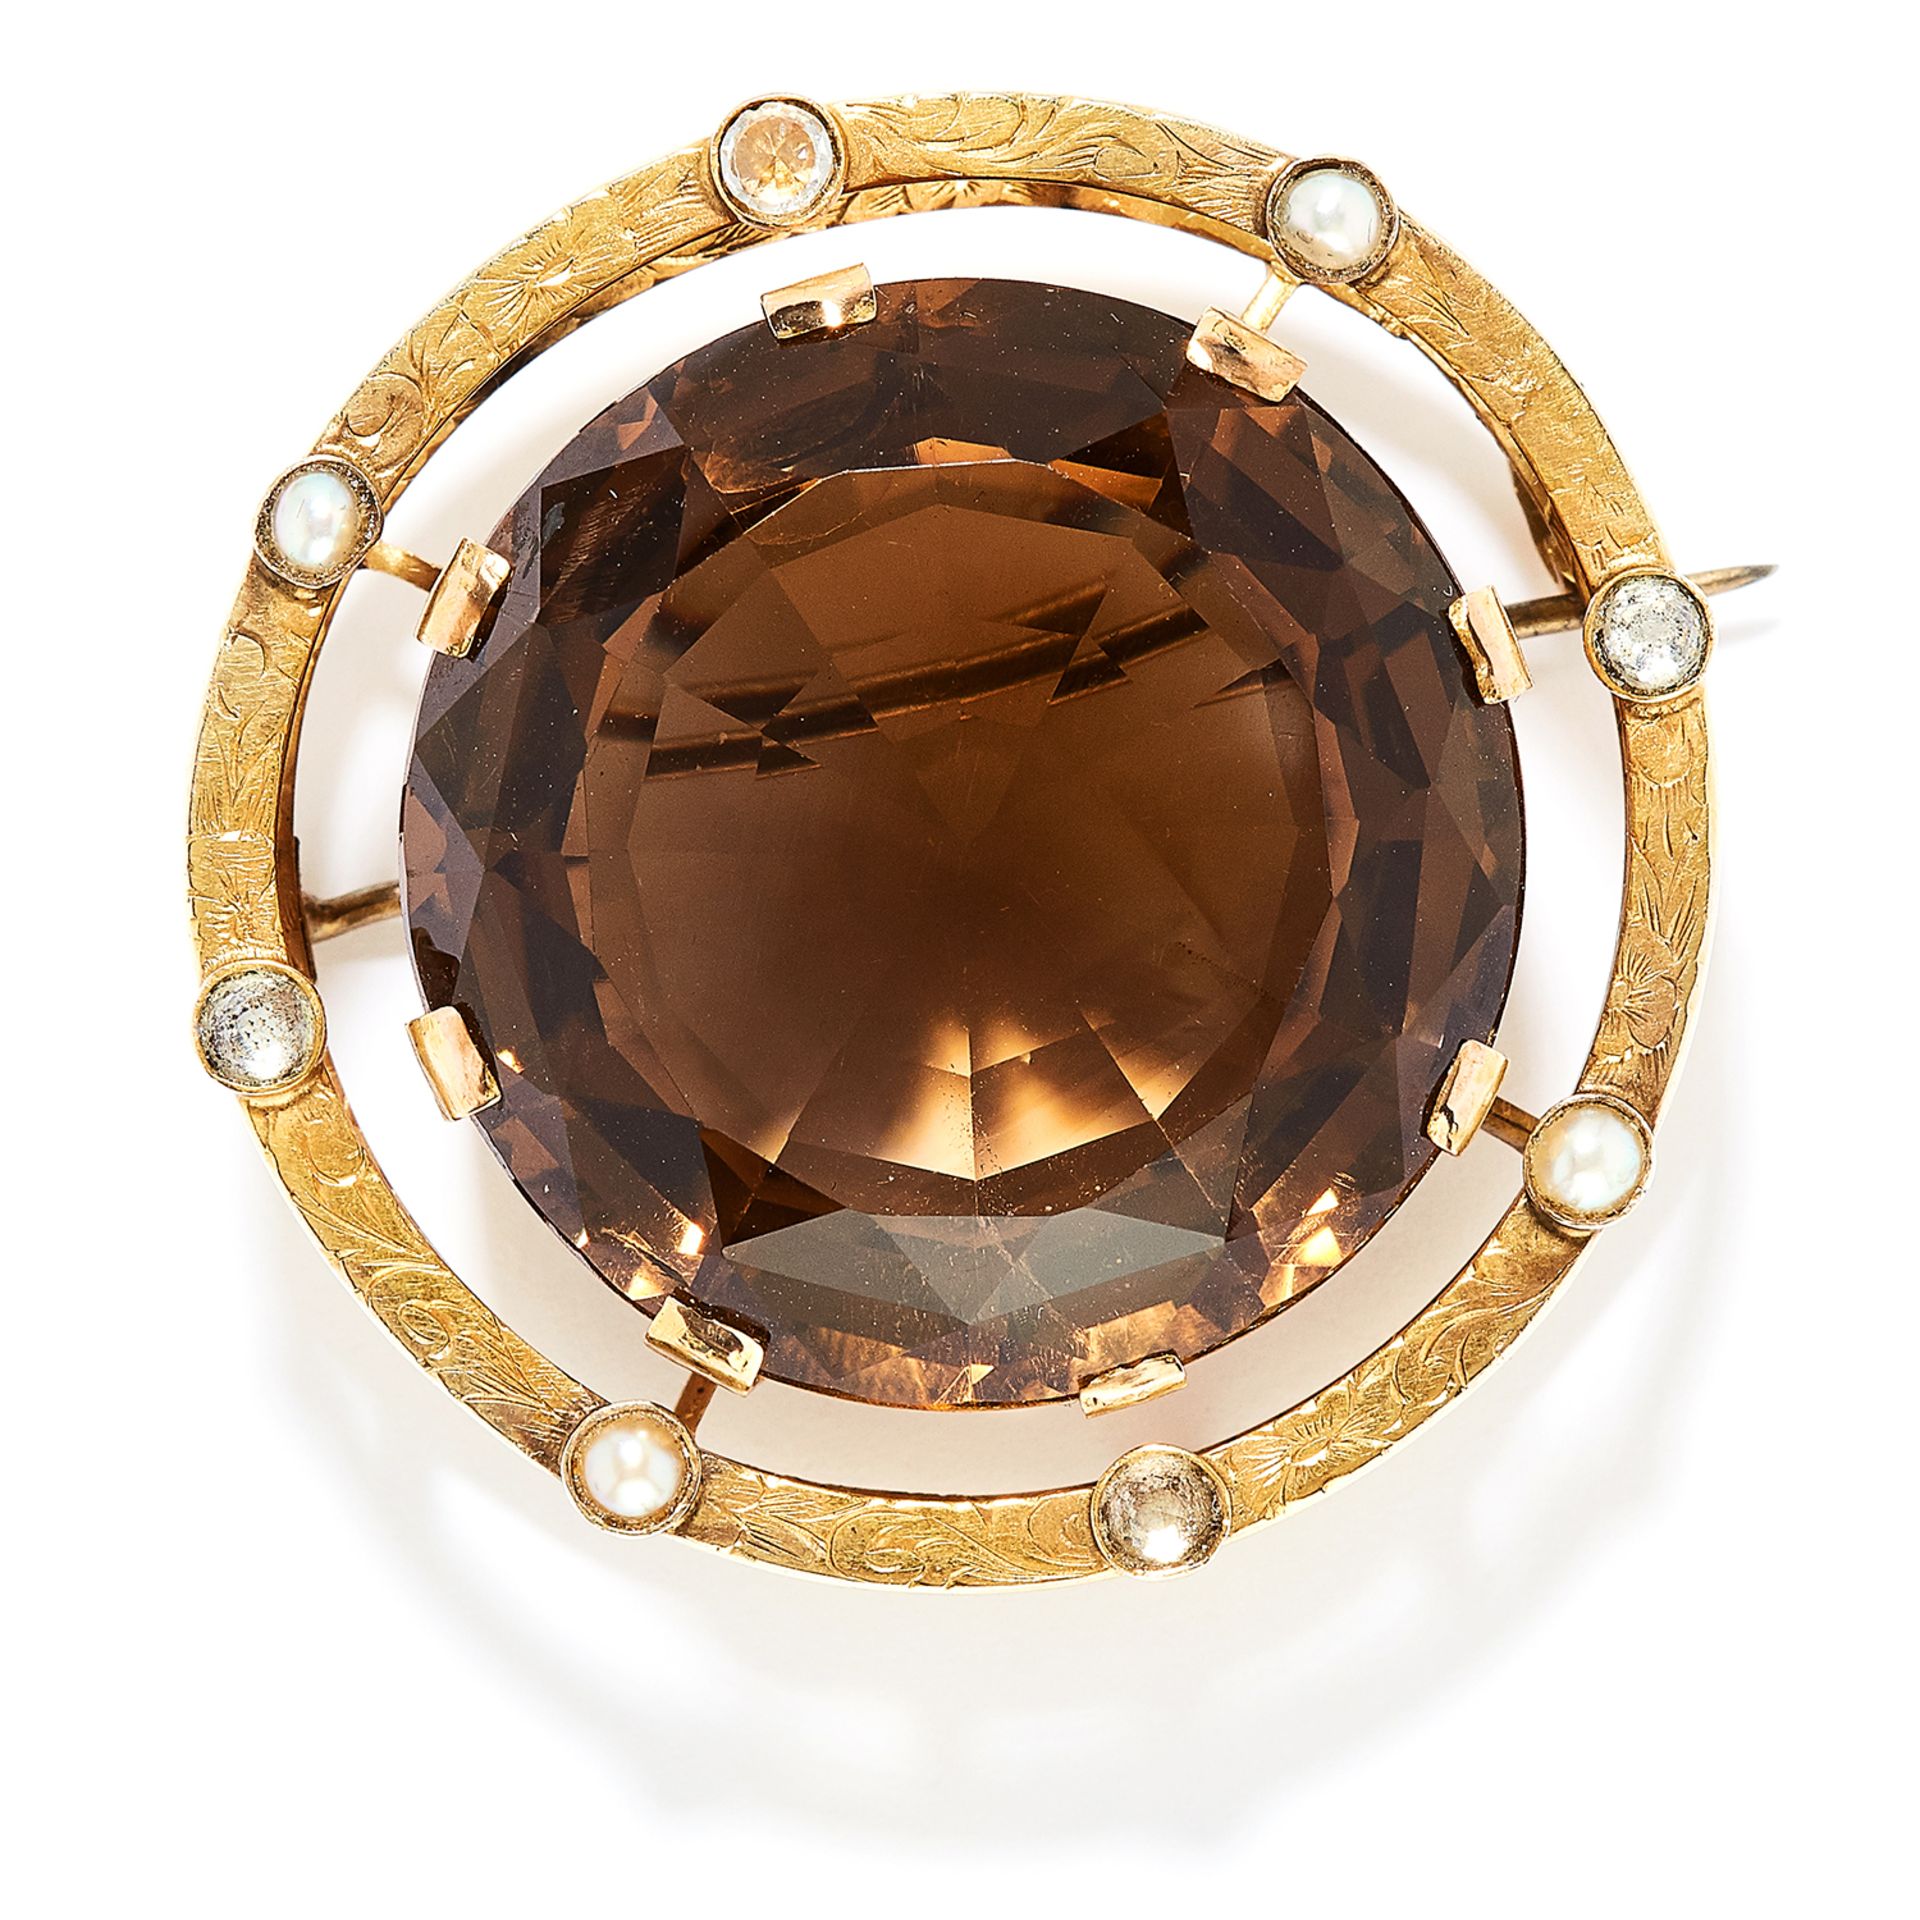 ANTIQUE SMOKY QUARTZ, PEARL AND DIAMOND BROOCH in high carat yellow gold, set with a round cut